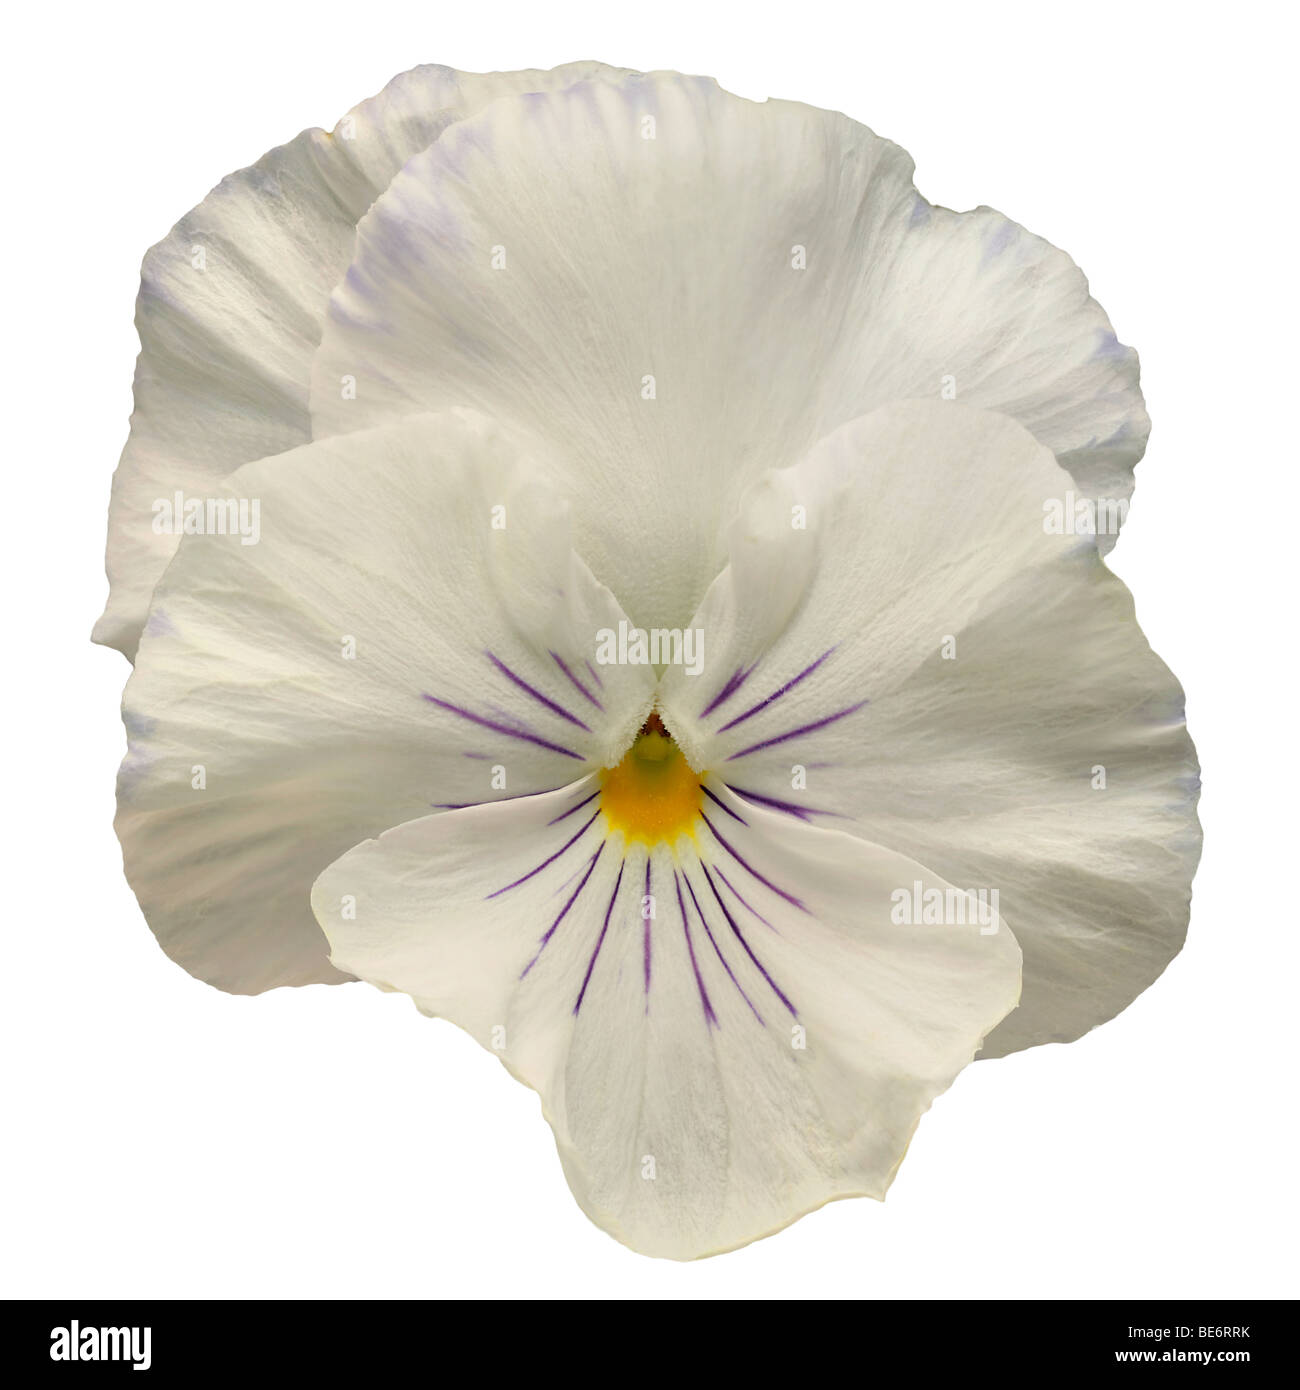 pansy white and violet Stock Photo